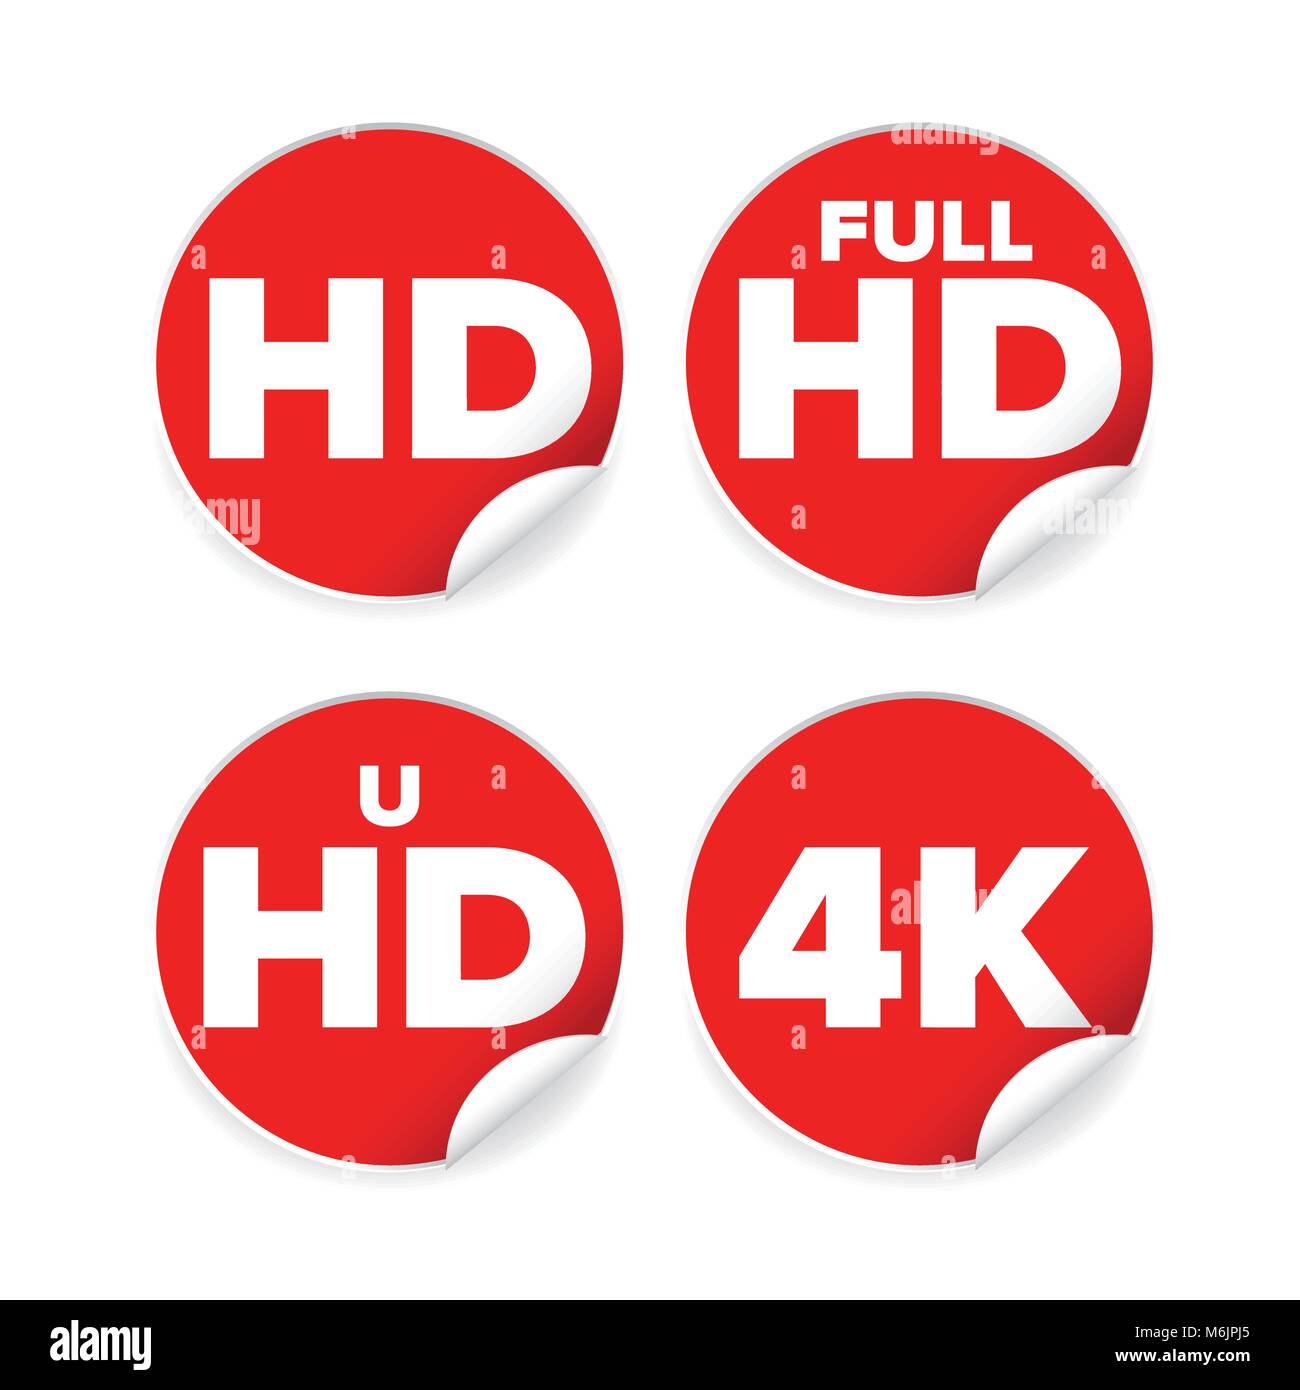 HD resolution ison label Stock Vector